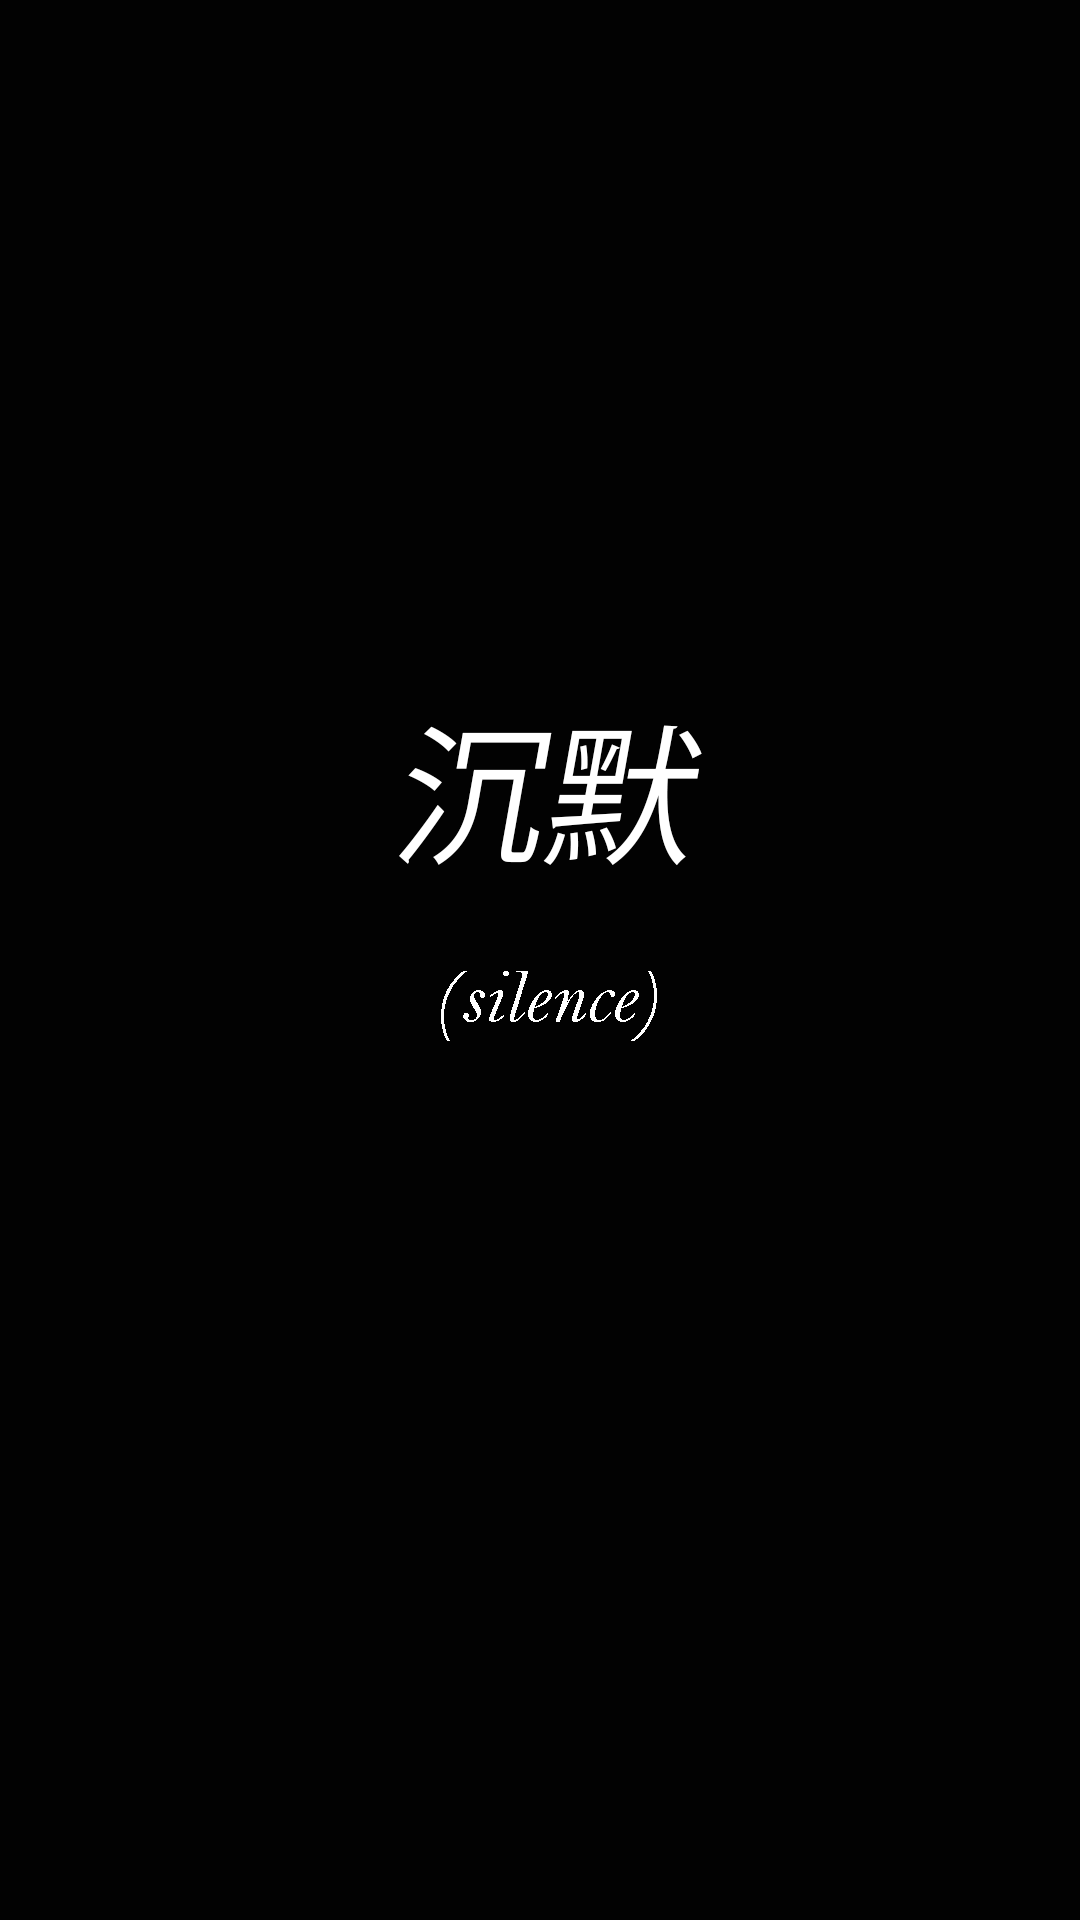 Aesthetic japanese text wallpapers